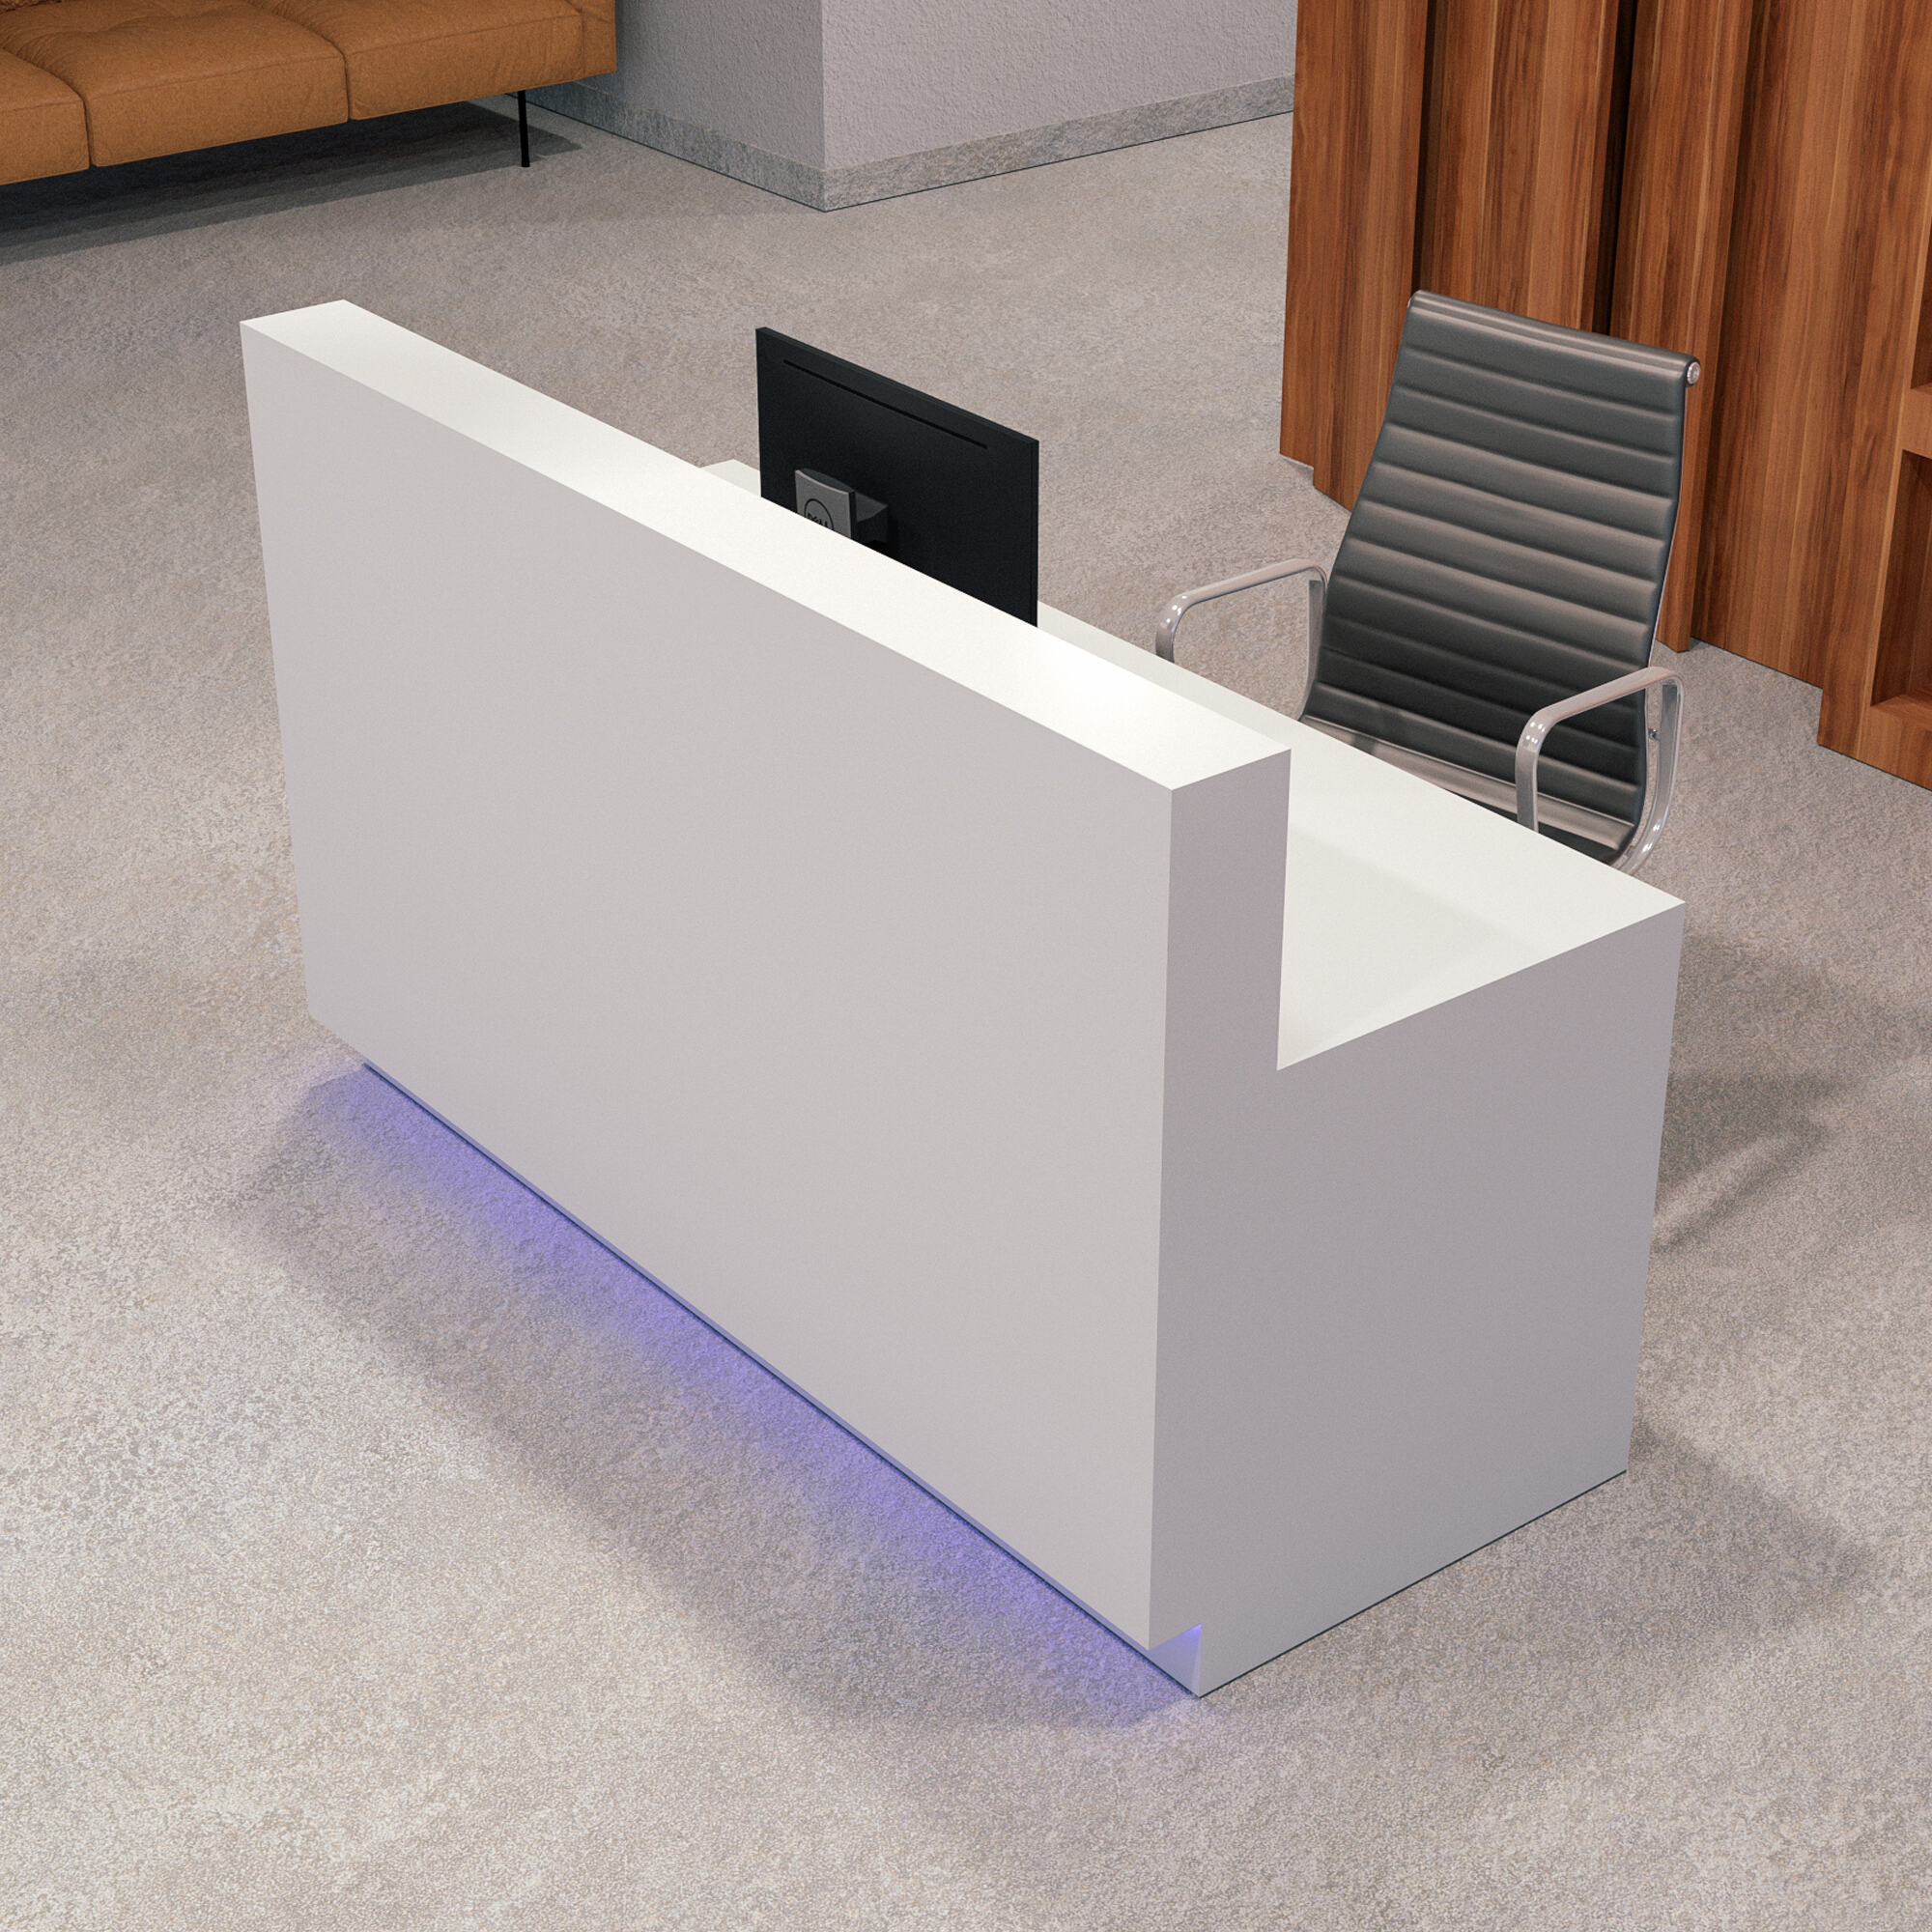 72-inch Dallas Straight Custom Reception Desk in white matte laminate main desk and brushed aluminum toe-kick, with color LED, shown here.